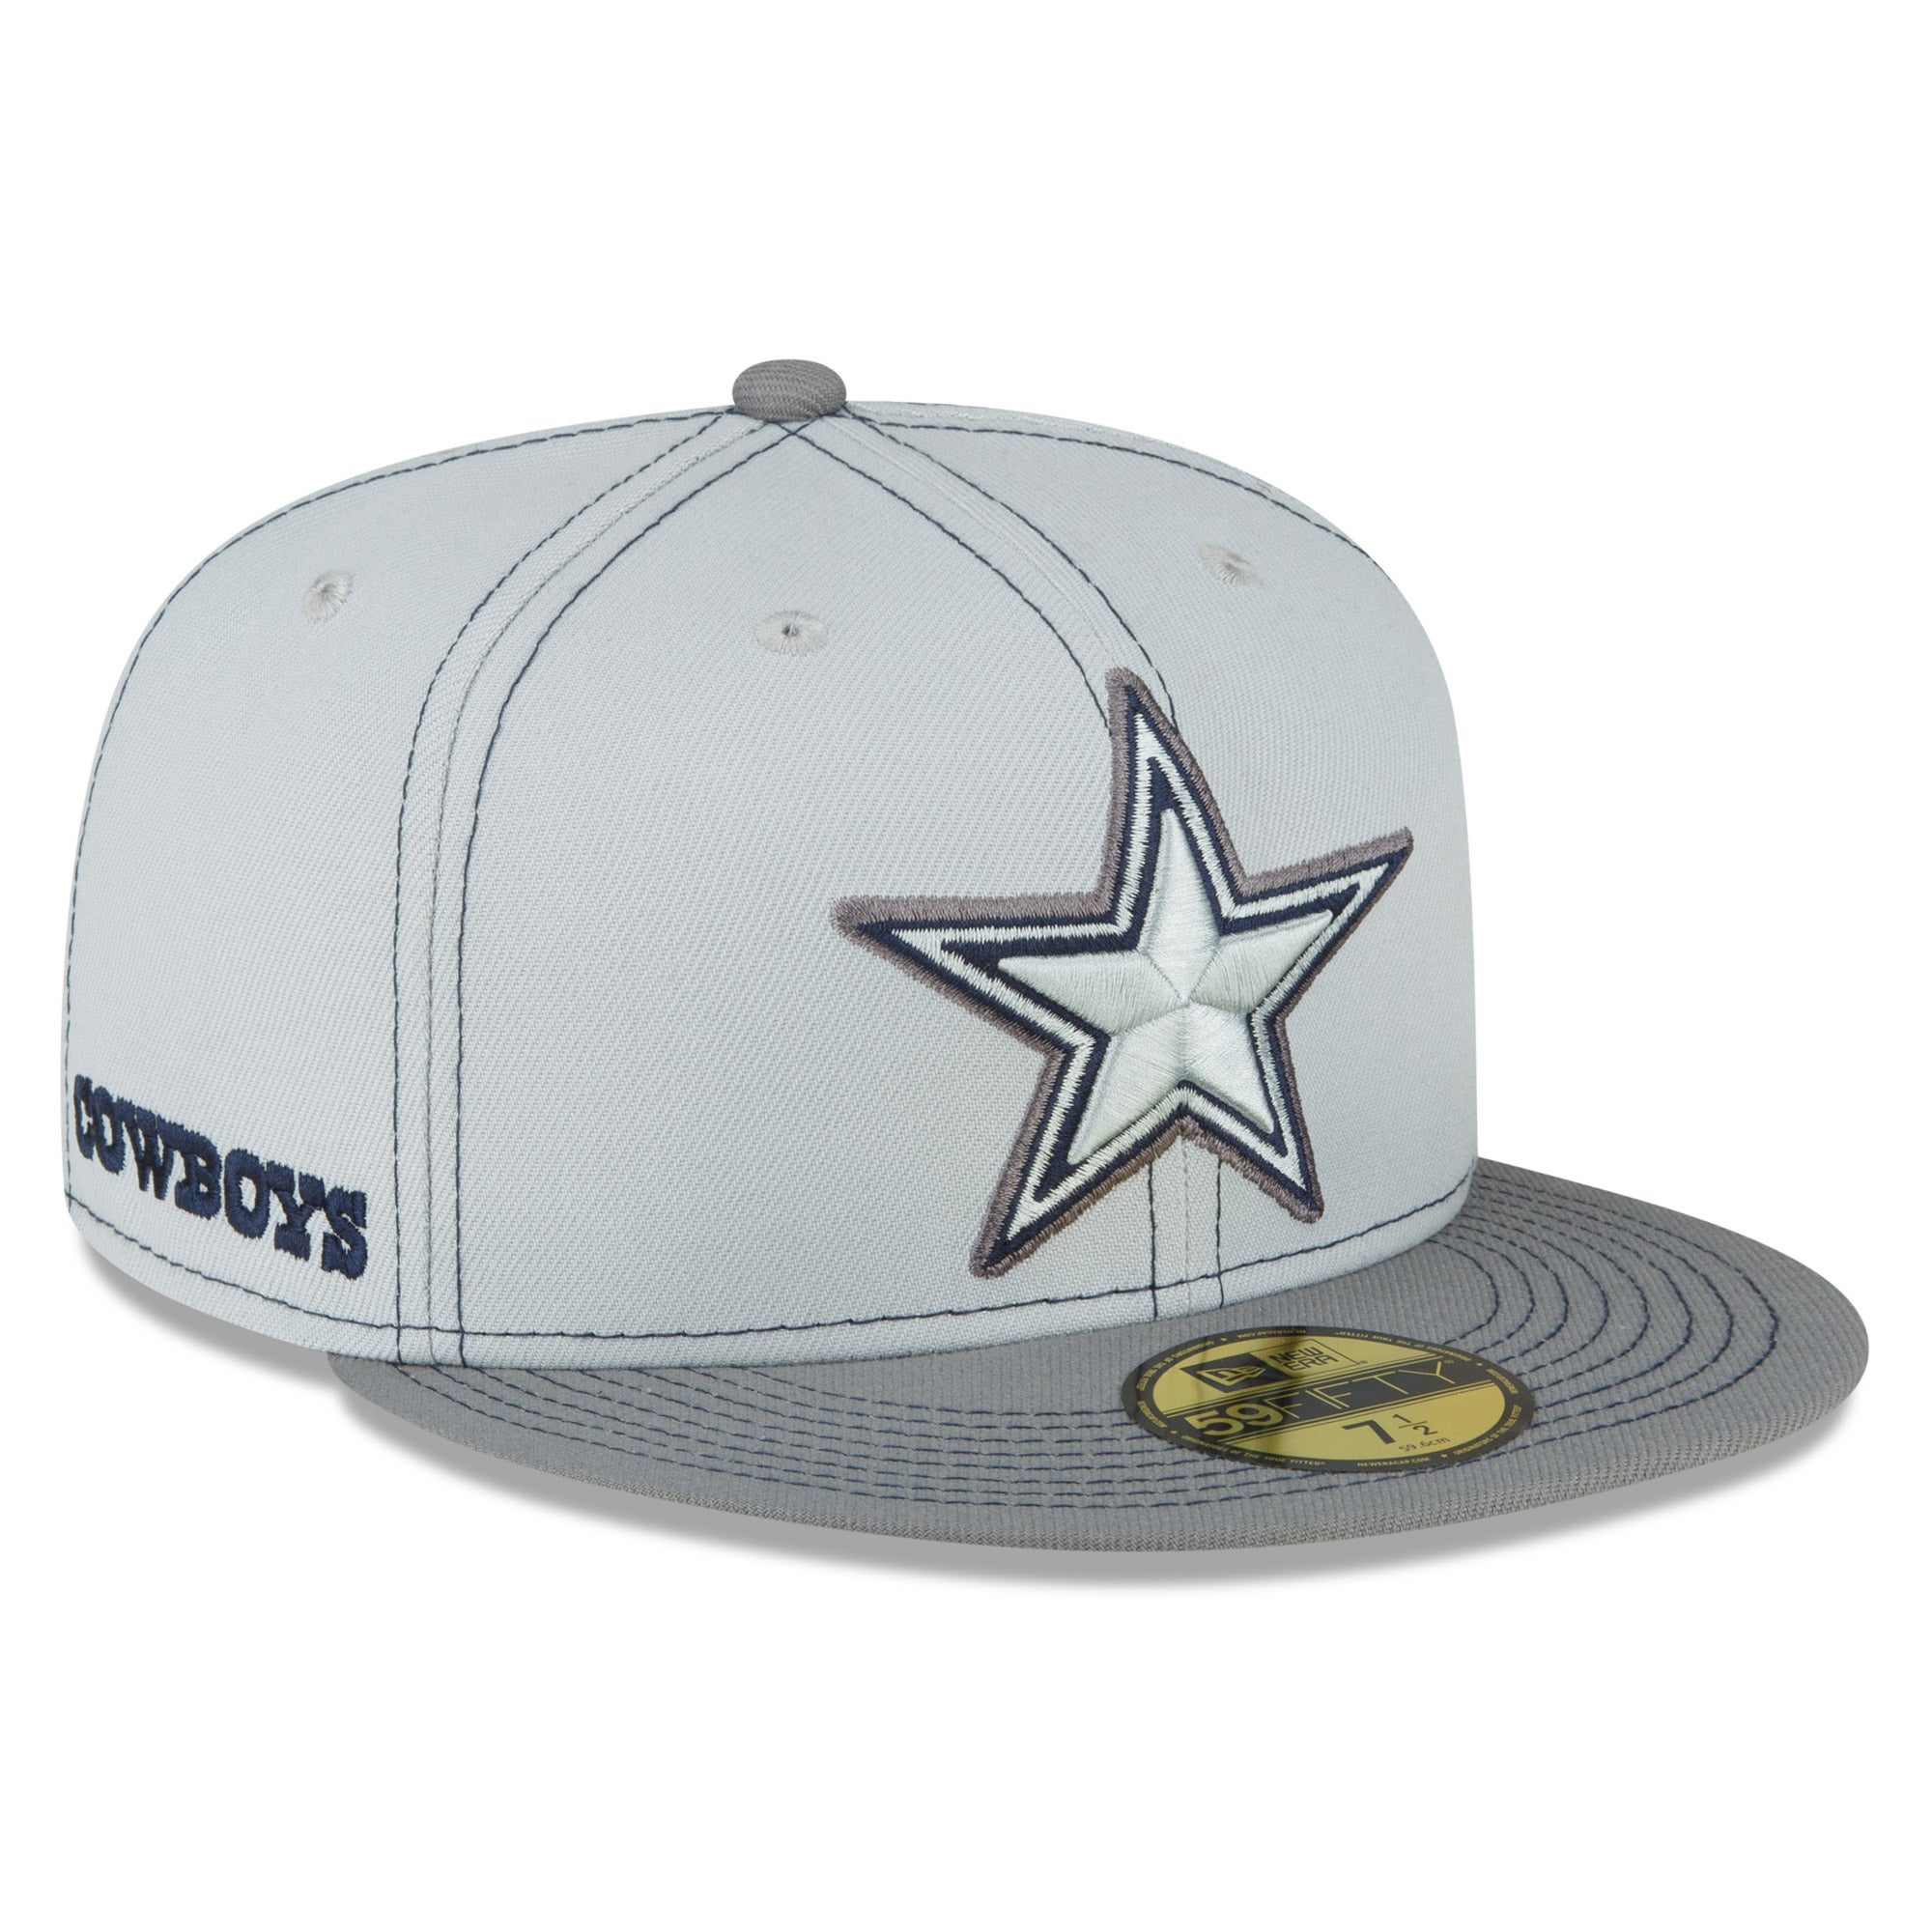 New Era Cowboys Pop 59FIFTY Fitted Hat - Men's